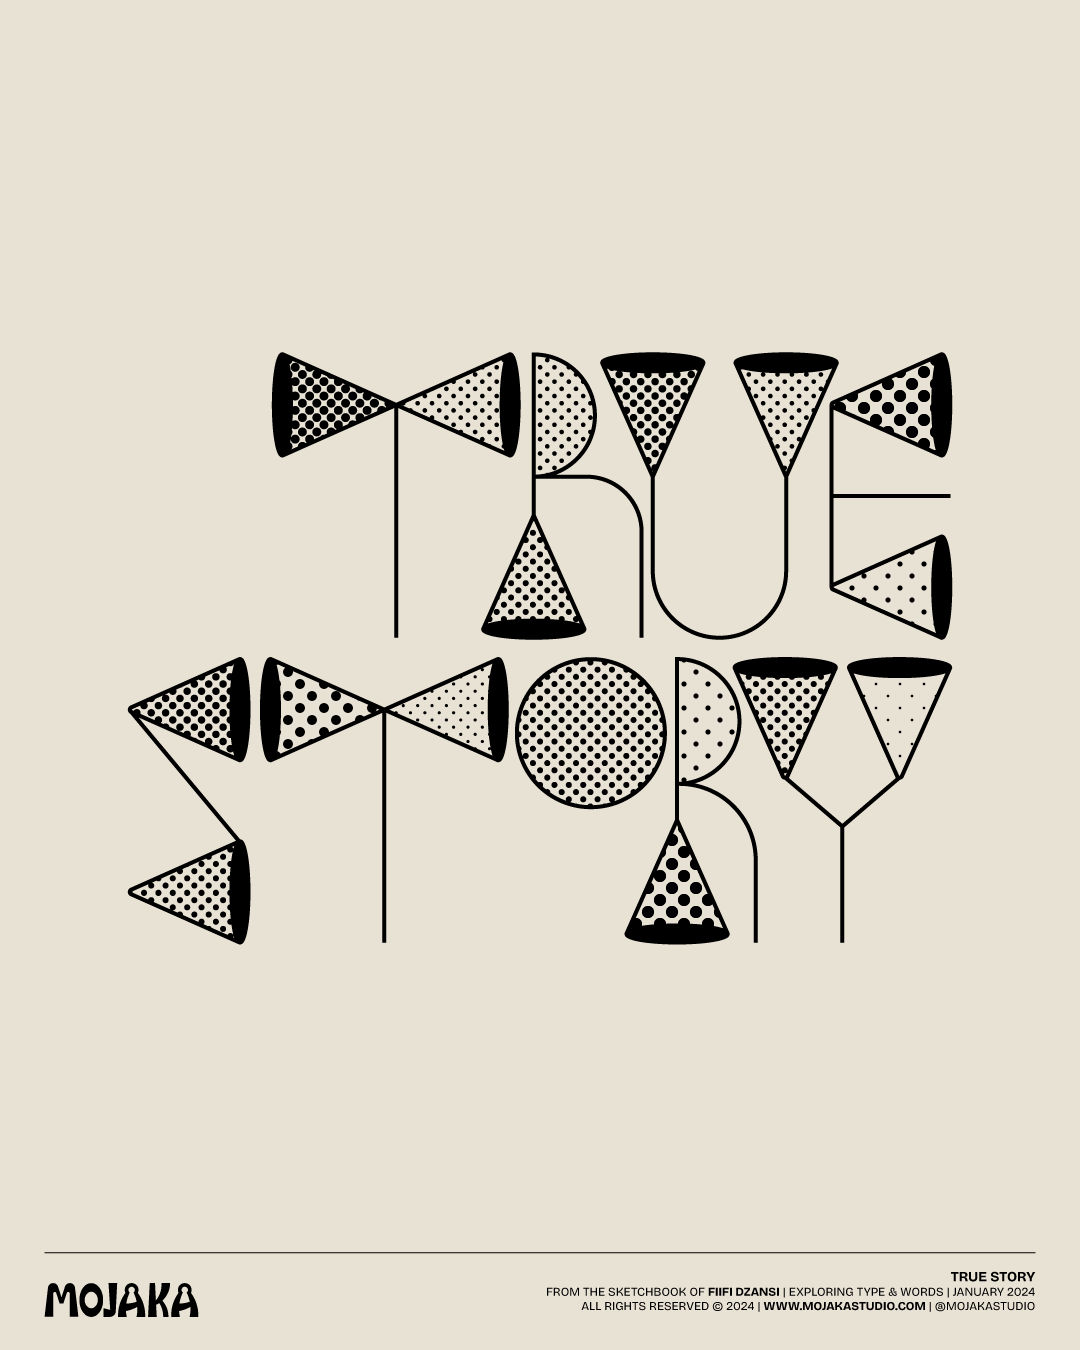 True story typography in black and white using shapes